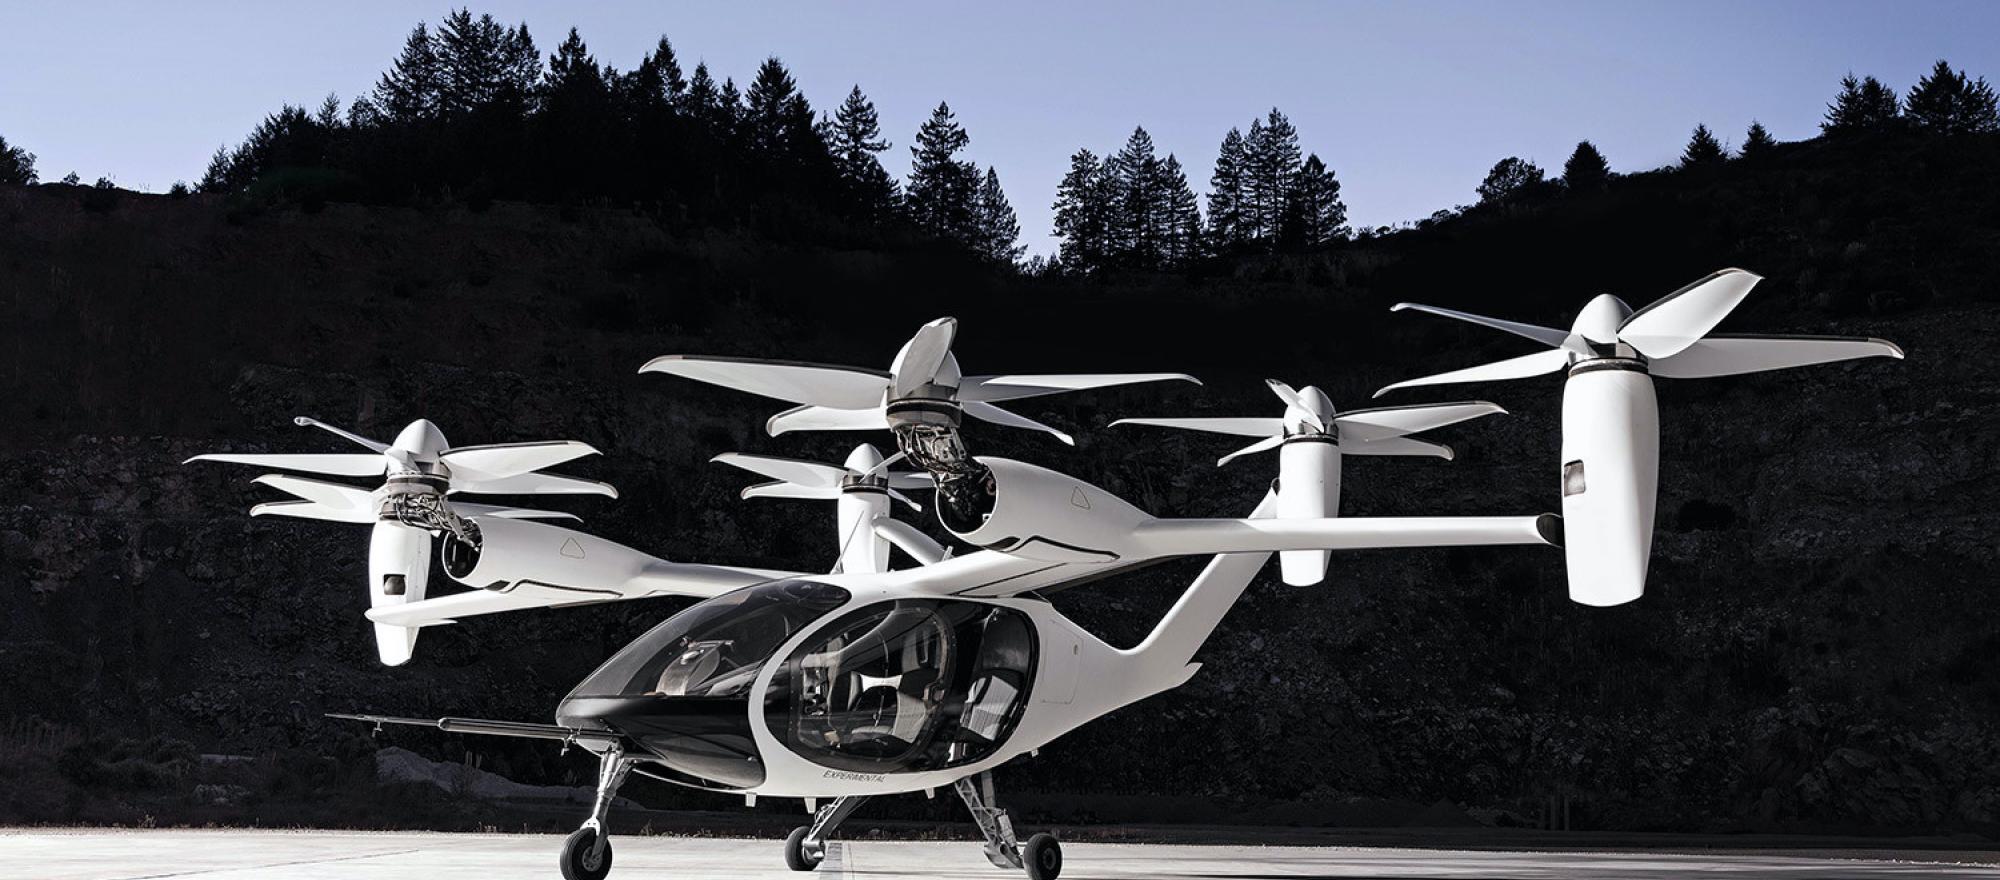 Joby Aviation's eVTOL will be capable of reaching a speed of 200 mph and fly 150 miles on a single charge. (Photo: Joby Aviation)